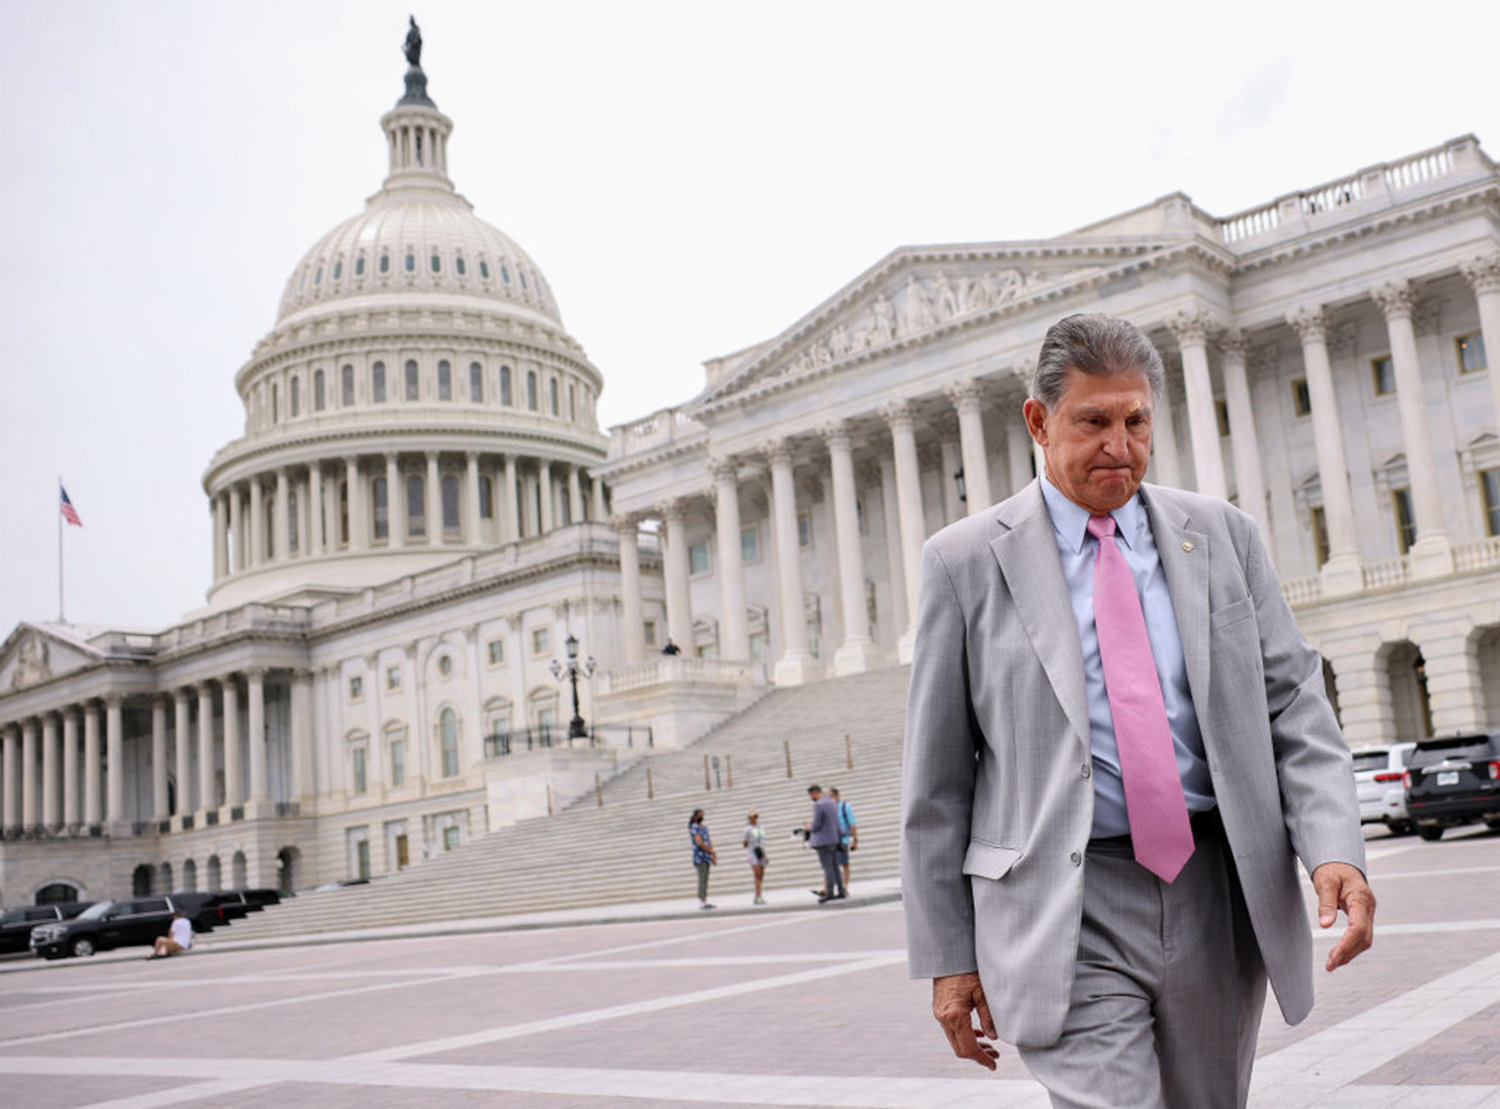 Sen. Joe Manchin (D-WV) leaves the U.S. Capitol following a vote on August 3, 2021 in Washington, DC. (Kevin Dietsch/Getty Images/TNS)